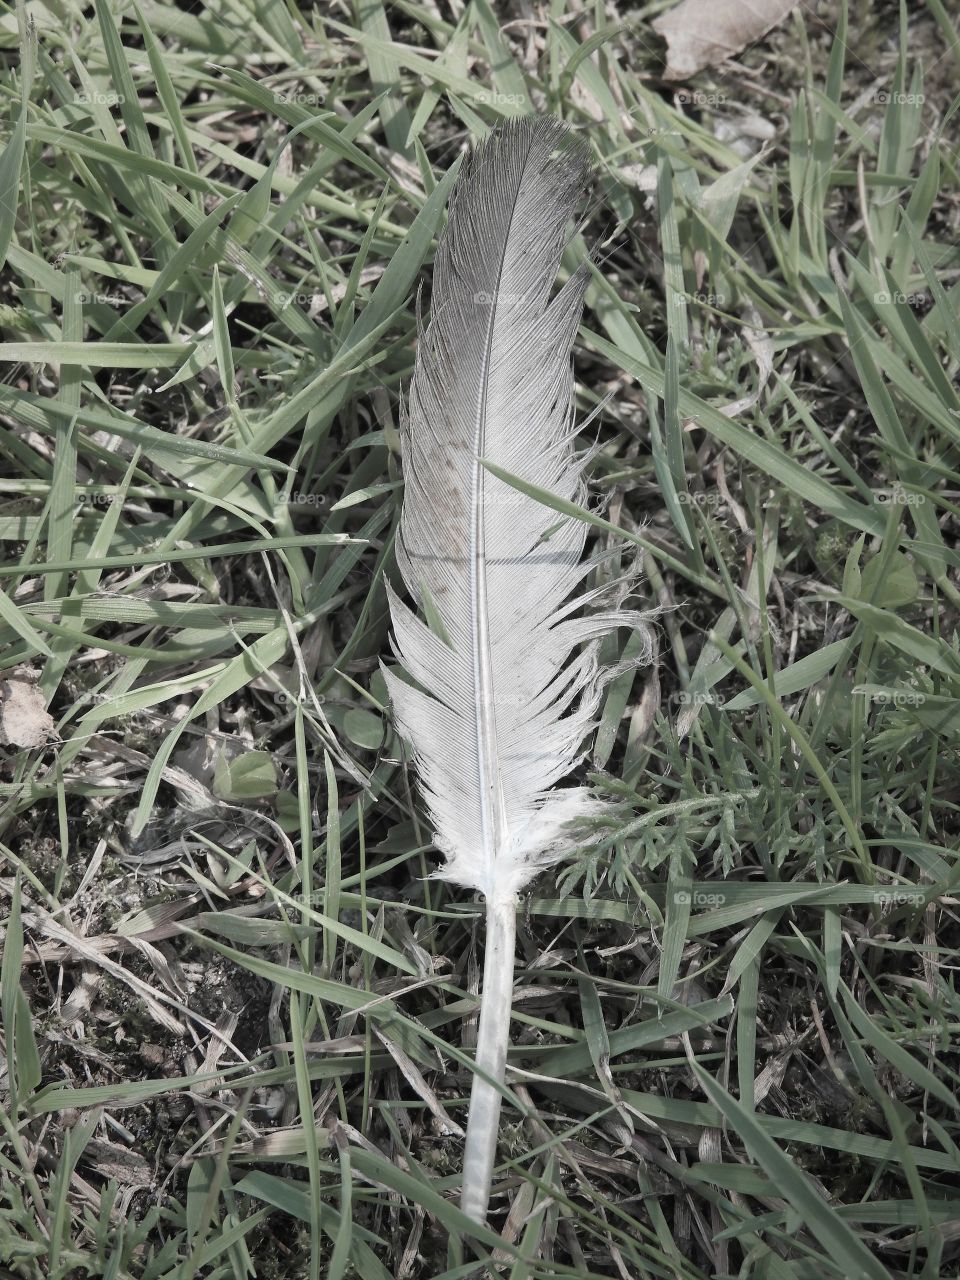 Feather on the ground